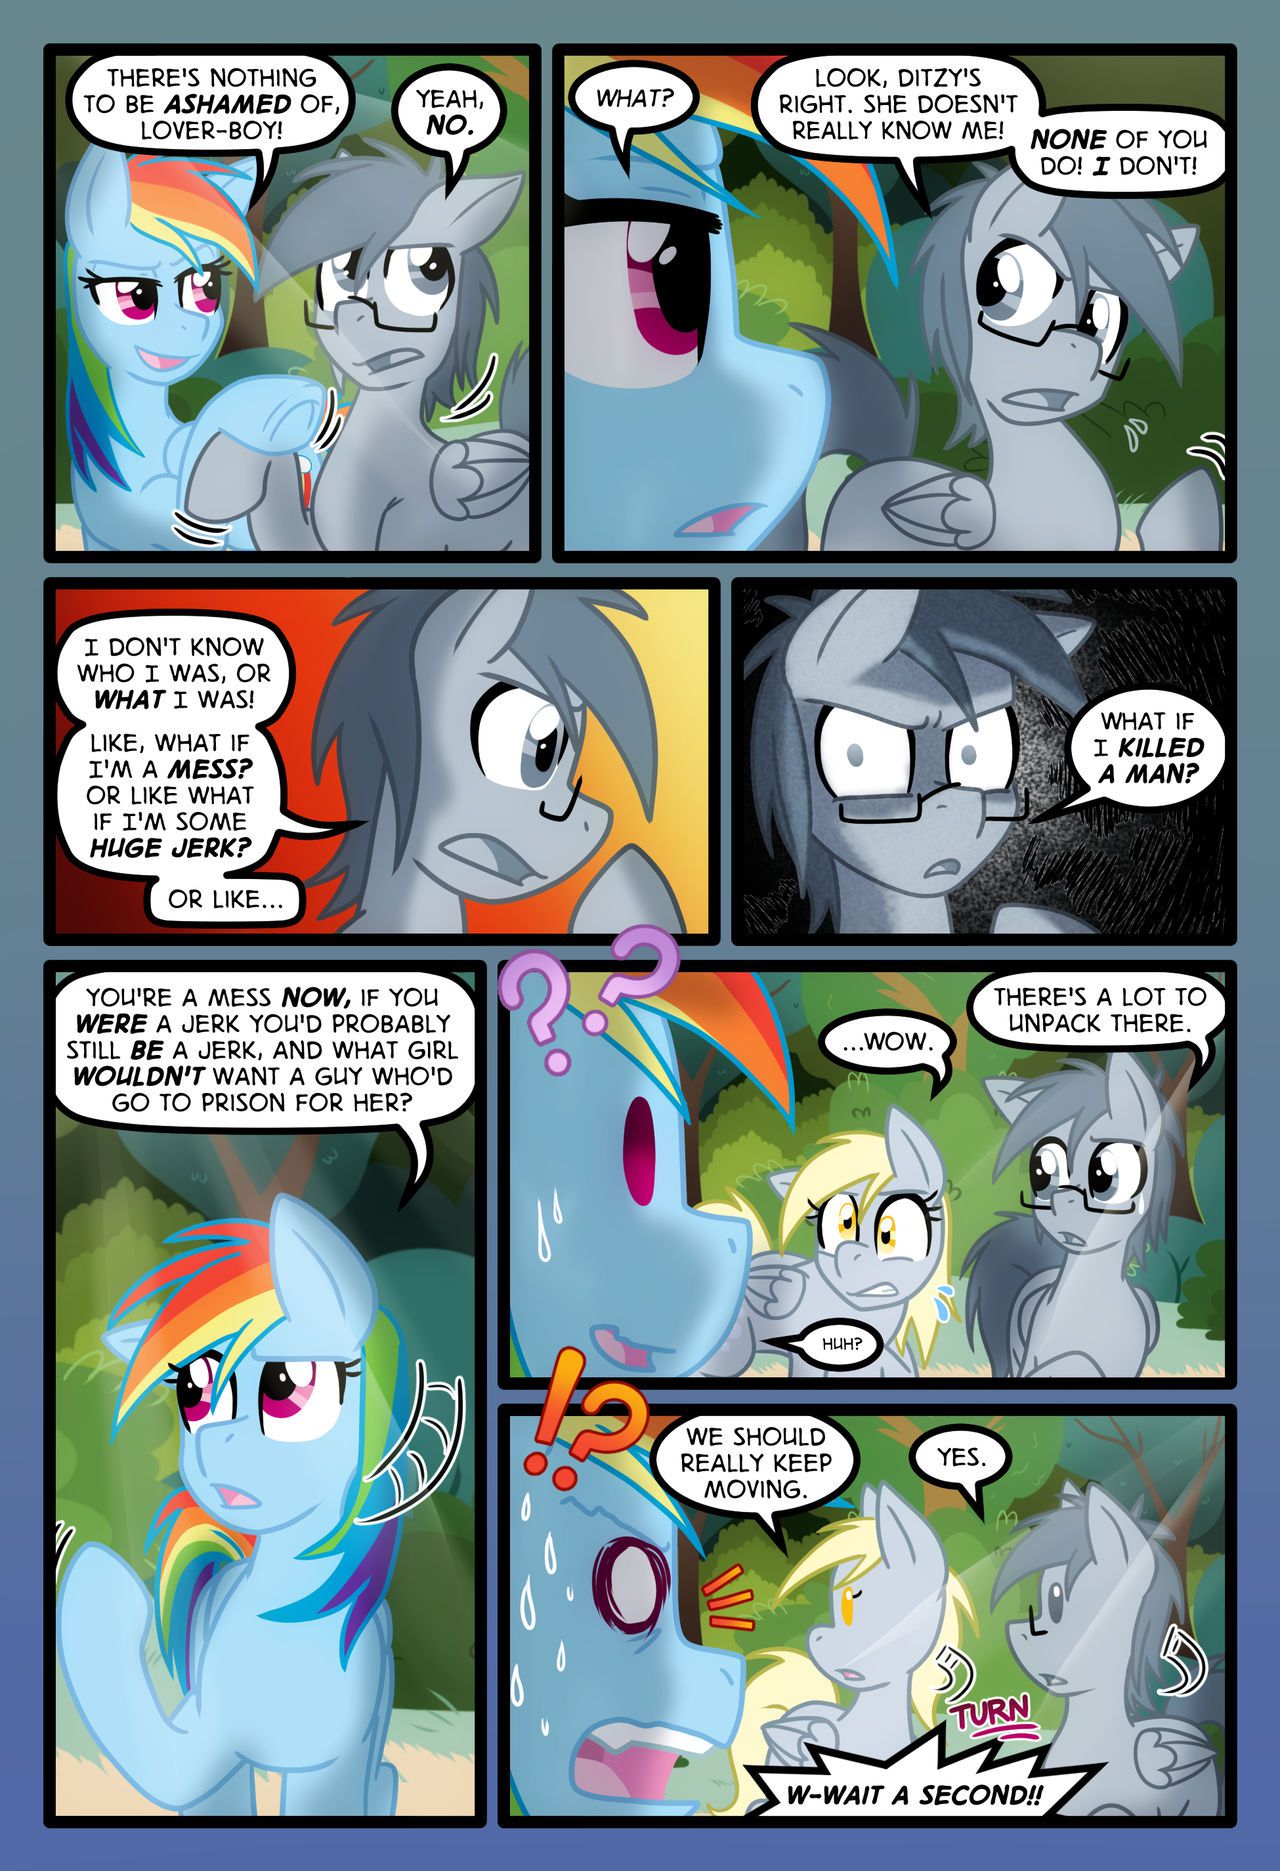 [Zaron] Lonely Hooves (My Little Pony Friendship Is Magic) [Ongoing] 226